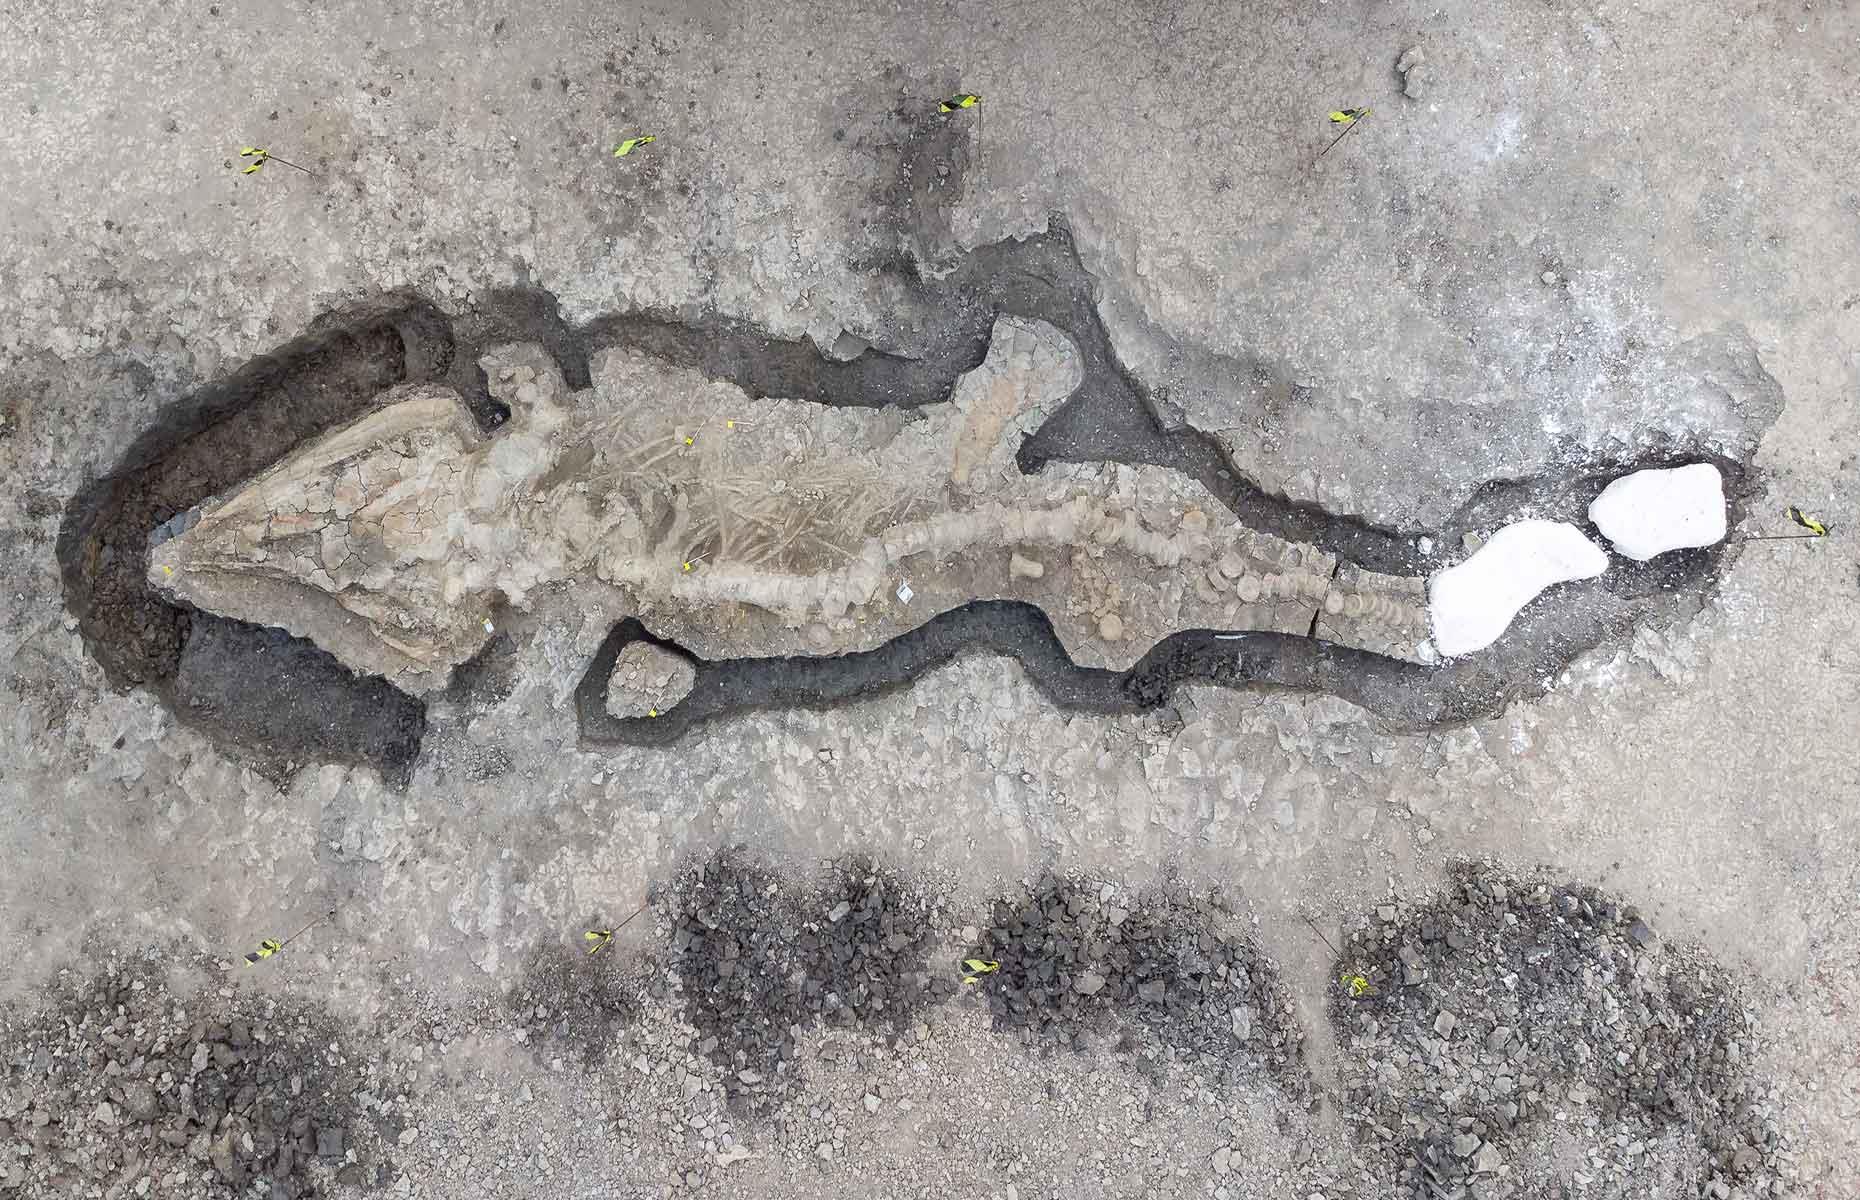 <p>Another recent ancient discovery made in Rutland, England was <a href="https://www.theguardian.com/science/2022/jan/10/huge-sea-dragon-named-one-of-uks-greatest-fossil-finds">the fossilised remains of an ichthyosaur</a>, also known as a sea dragon. The impressive and well-preserved skeleton was first found in February 2021 during a routine draining of a lagoon at Rutland Water Nature Reserve, which is owned and run by Anglian Water. Not only is it the biggest and most complete skeleton of its kind found in the UK, scientists also believe it's the first of its species, known as Temnodontosaurus trigonodon, to be discovered in the country.</p>